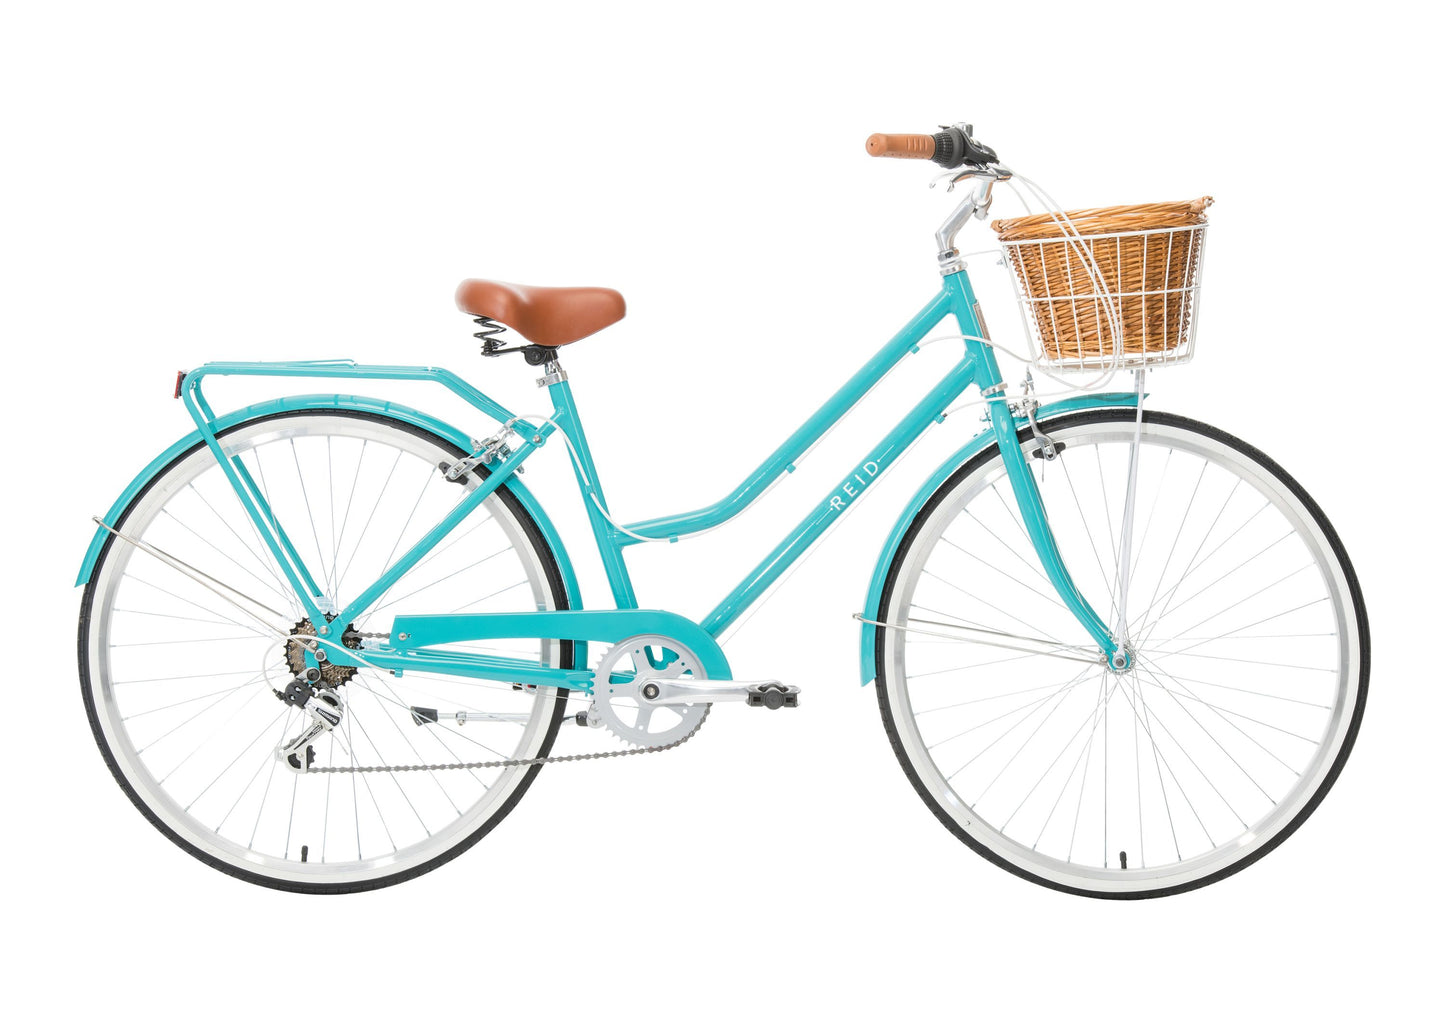 Ladies Lite Vintage Bike in Turquoise with 7-speed Shimano gearing from Reid Cycles Australia